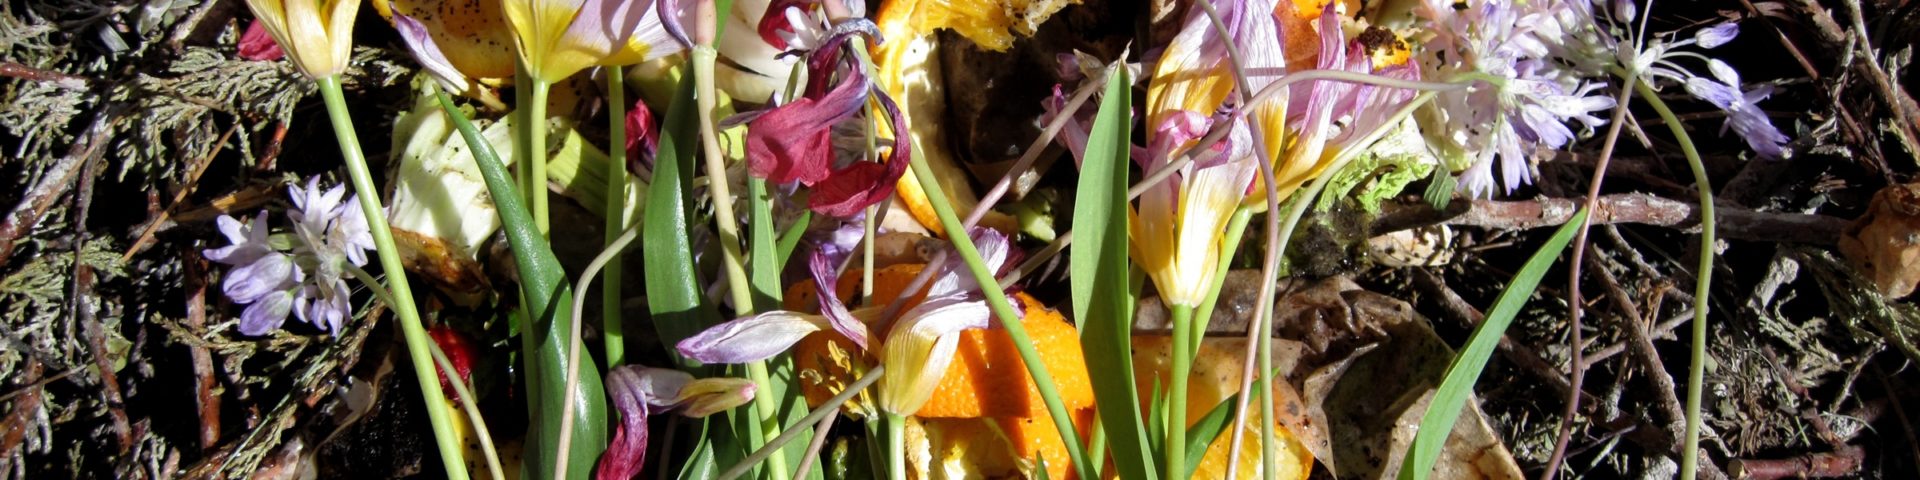 Compost, featuring orange peels and pink flowers